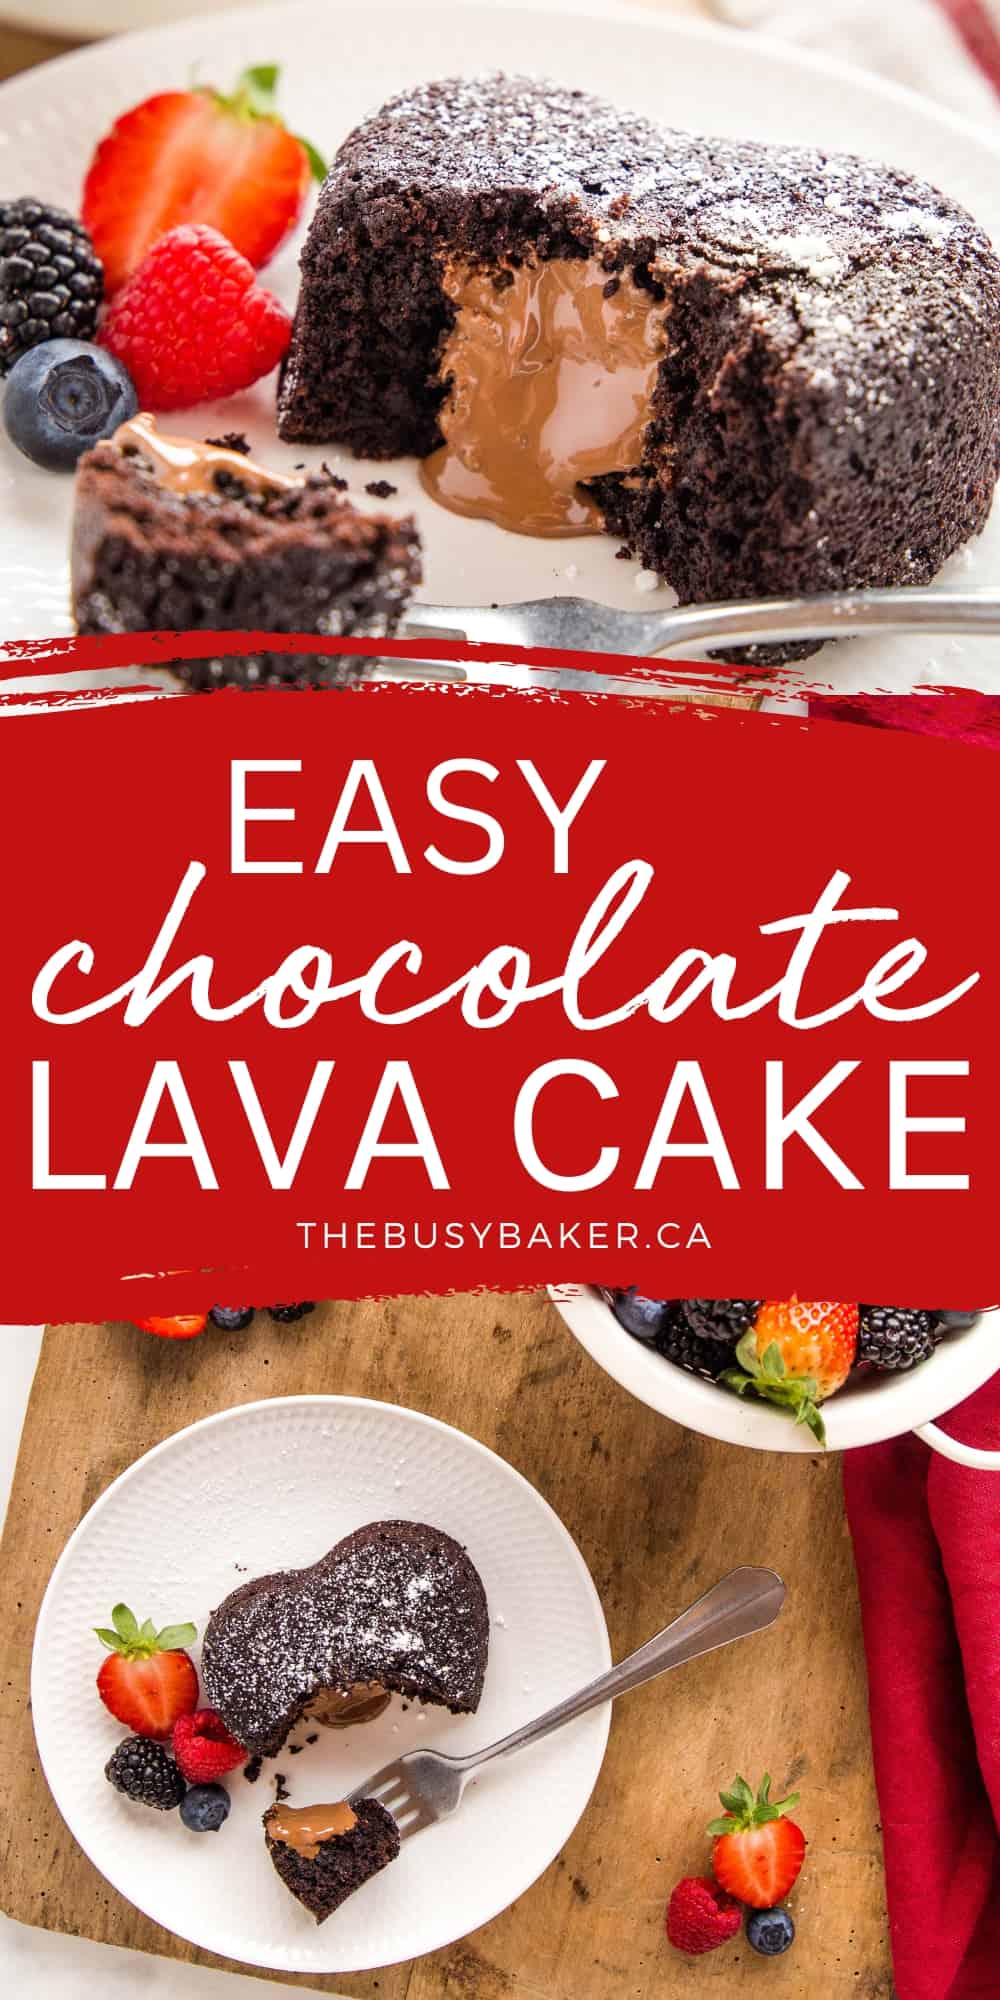 This Chocolate Lava Cake is a quick and easy dessert for Valentine's Day - a moist and fudgey brownie cake stuffed with melted chocolate. Recipe from thebusybaker.ca! #chocolatelavacake #lavacake #moltenchocolatecake #valentinesday #dessert #cake #brownie #easydessert via @busybakerblog